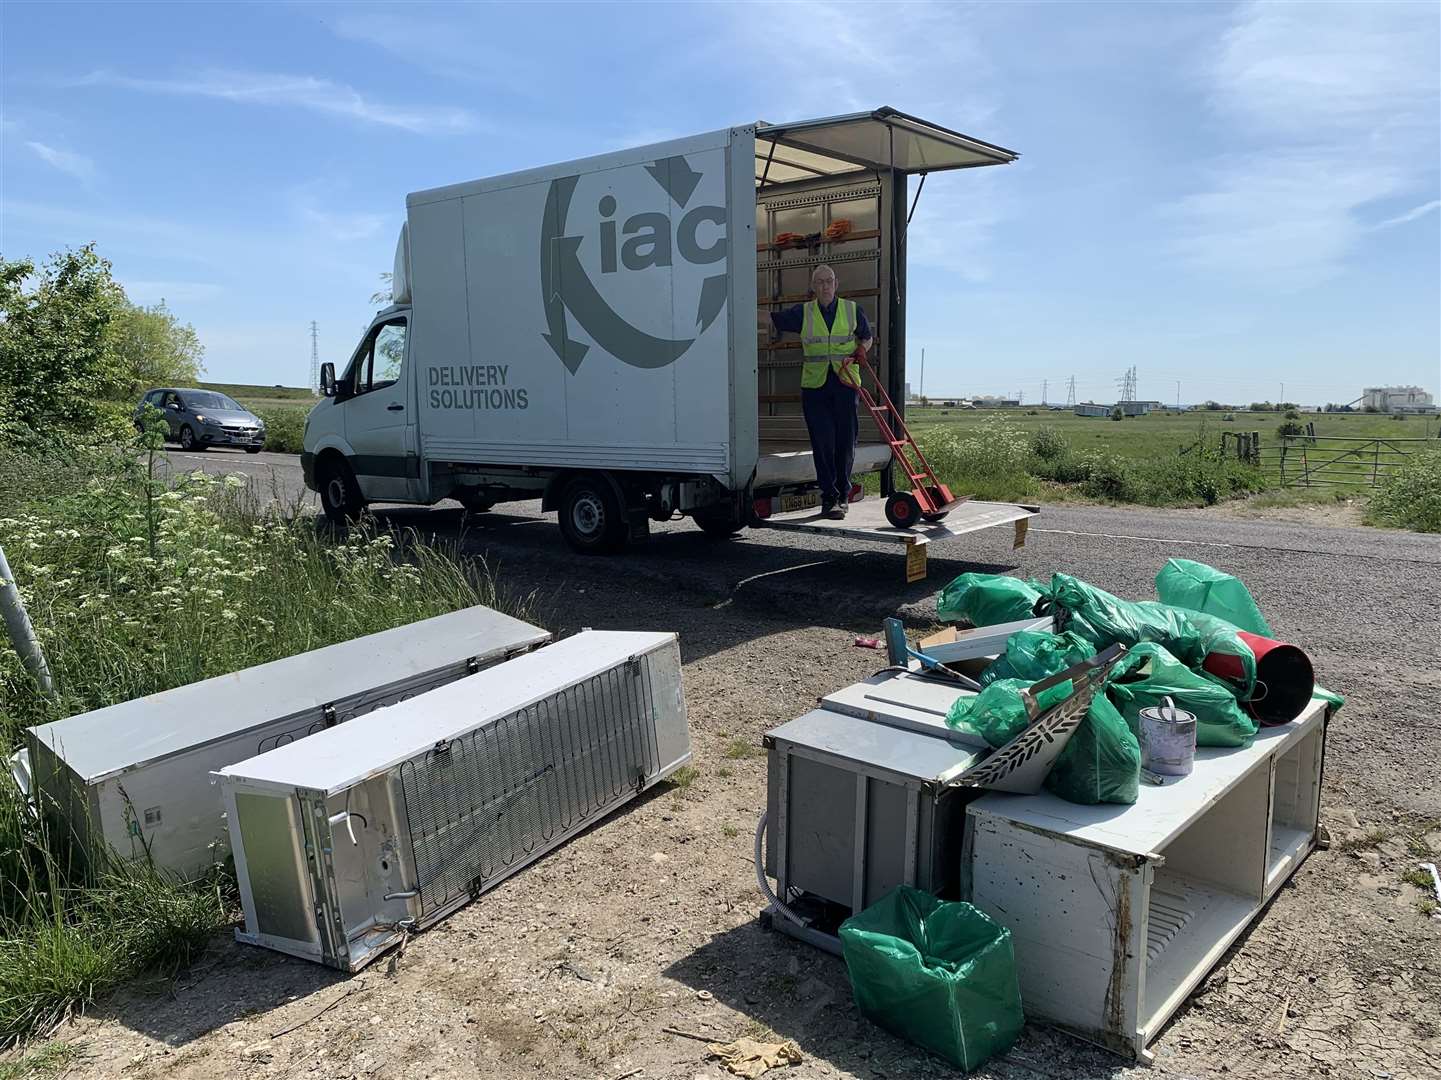 Eyesore: fridges fly-tipped at Iwade. Sittingbourne company IAC Delivery Solutions has collected them free of charge. Picture: IAC